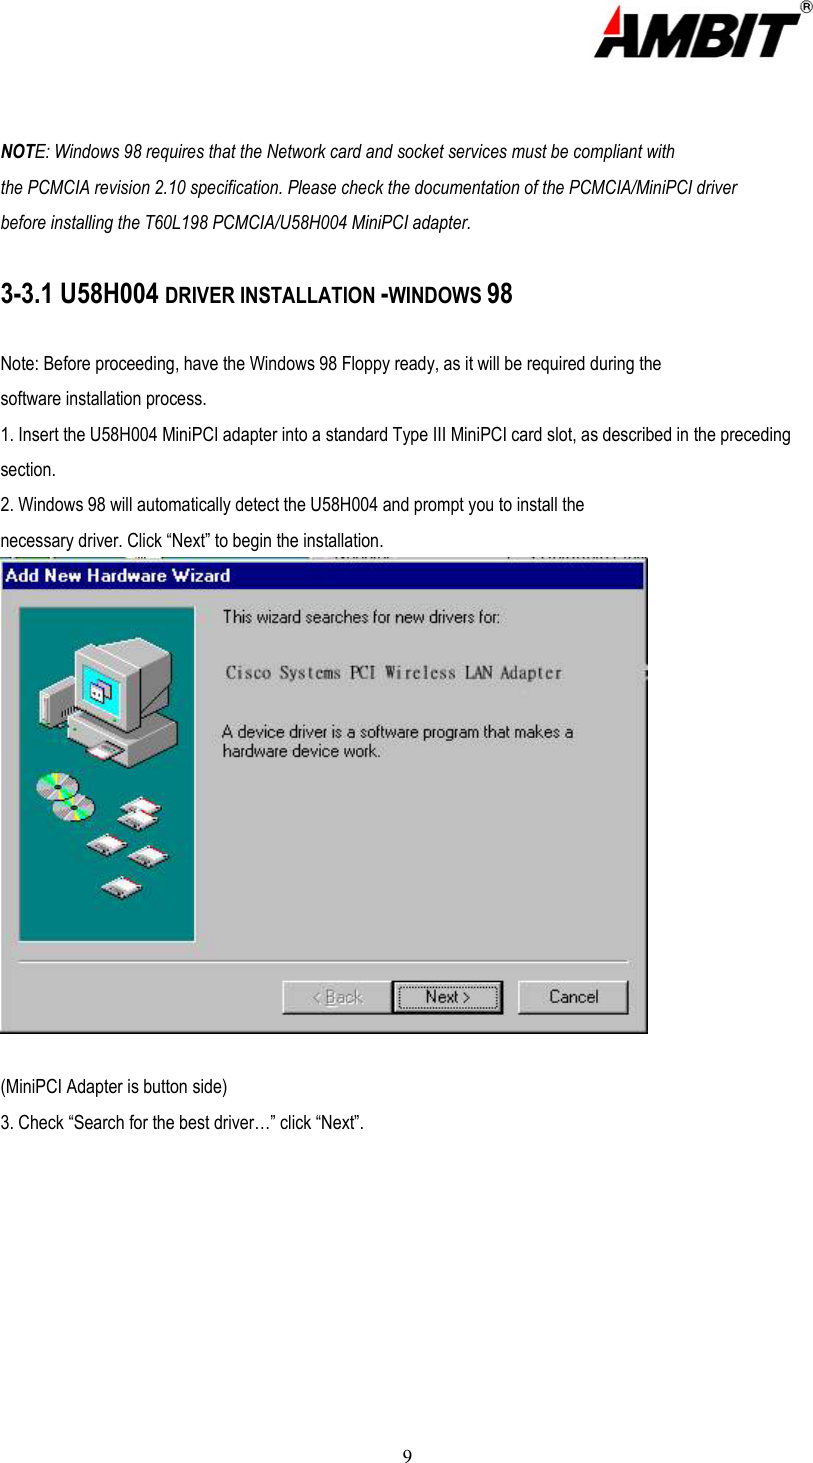  9   NOTE: Windows 98 requires that the Network card and socket services must be compliant with the PCMCIA revision 2.10 specification. Please check the documentation of the PCMCIA/MiniPCI driver before installing the T60L198 PCMCIA/U58H004 MiniPCI adapter.  3-3.1 U58H004 DRIVER INSTALLATION -WINDOWS 98  Note: Before proceeding, have the Windows 98 Floppy ready, as it will be required during the software installation process. 1. Insert the U58H004 MiniPCI adapter into a standard Type III MiniPCI card slot, as described in the preceding section. 2. Windows 98 will automatically detect the U58H004 and prompt you to install the necessary driver. Click “Next” to begin the installation.  (MiniPCI Adapter is button side) 3. Check “Search for the best driver…” click “Next”. 